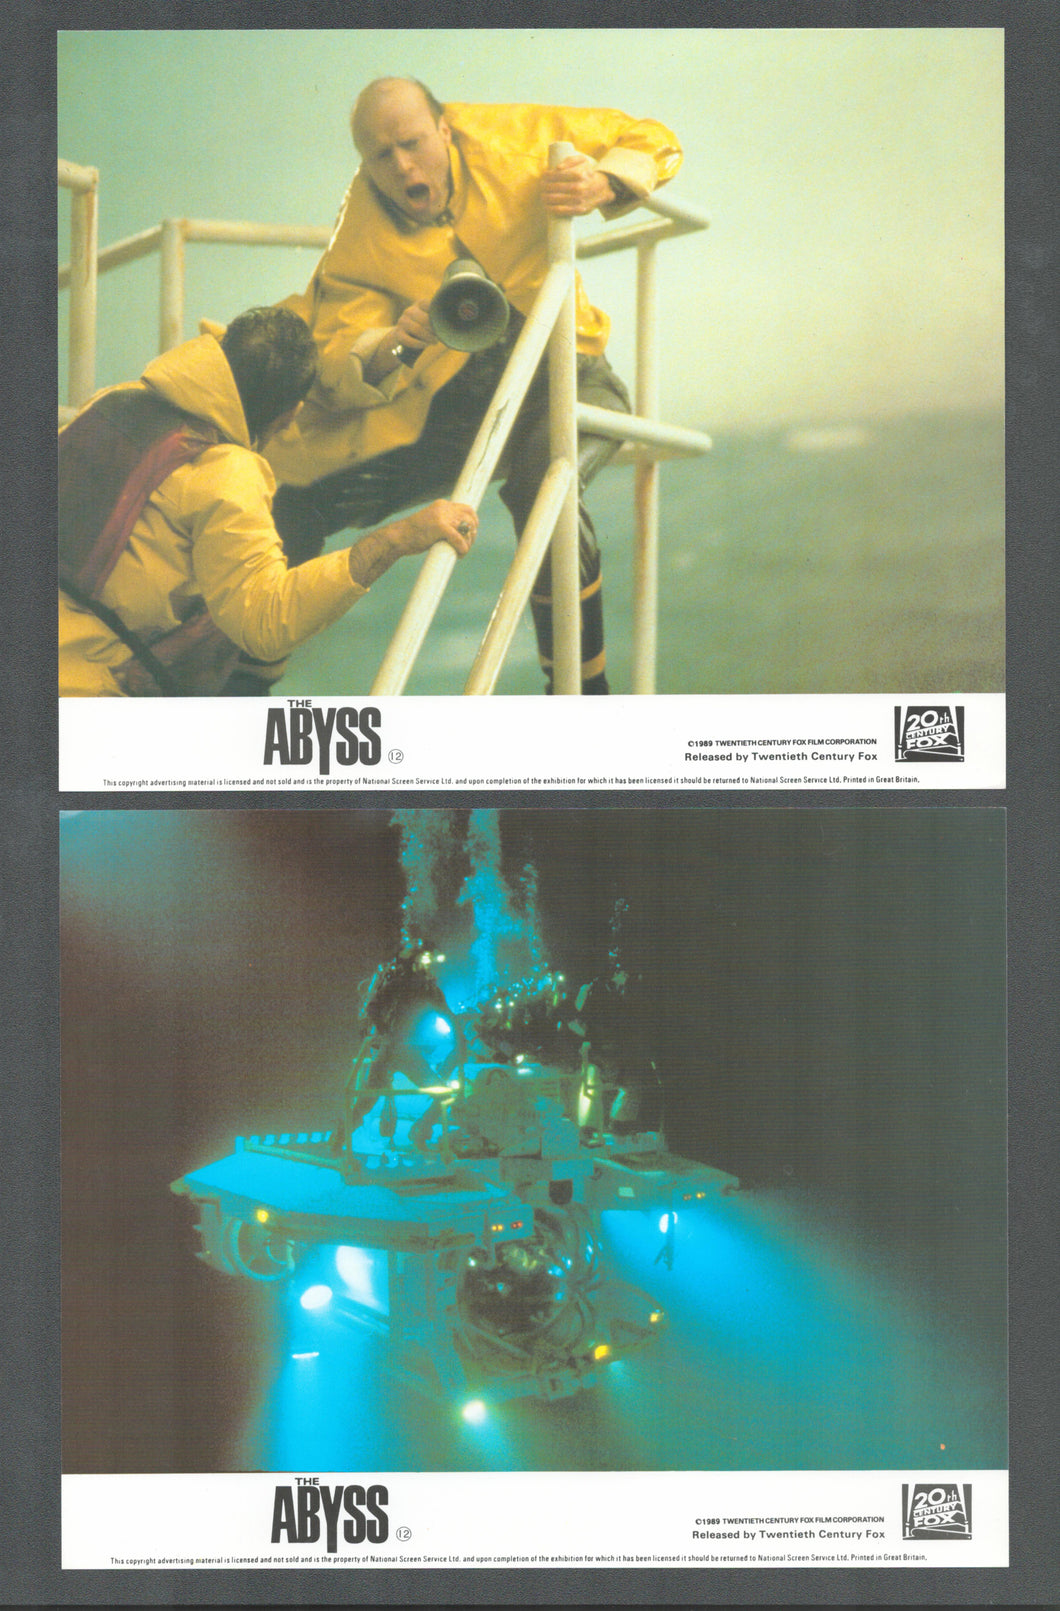 Abyss, 1989